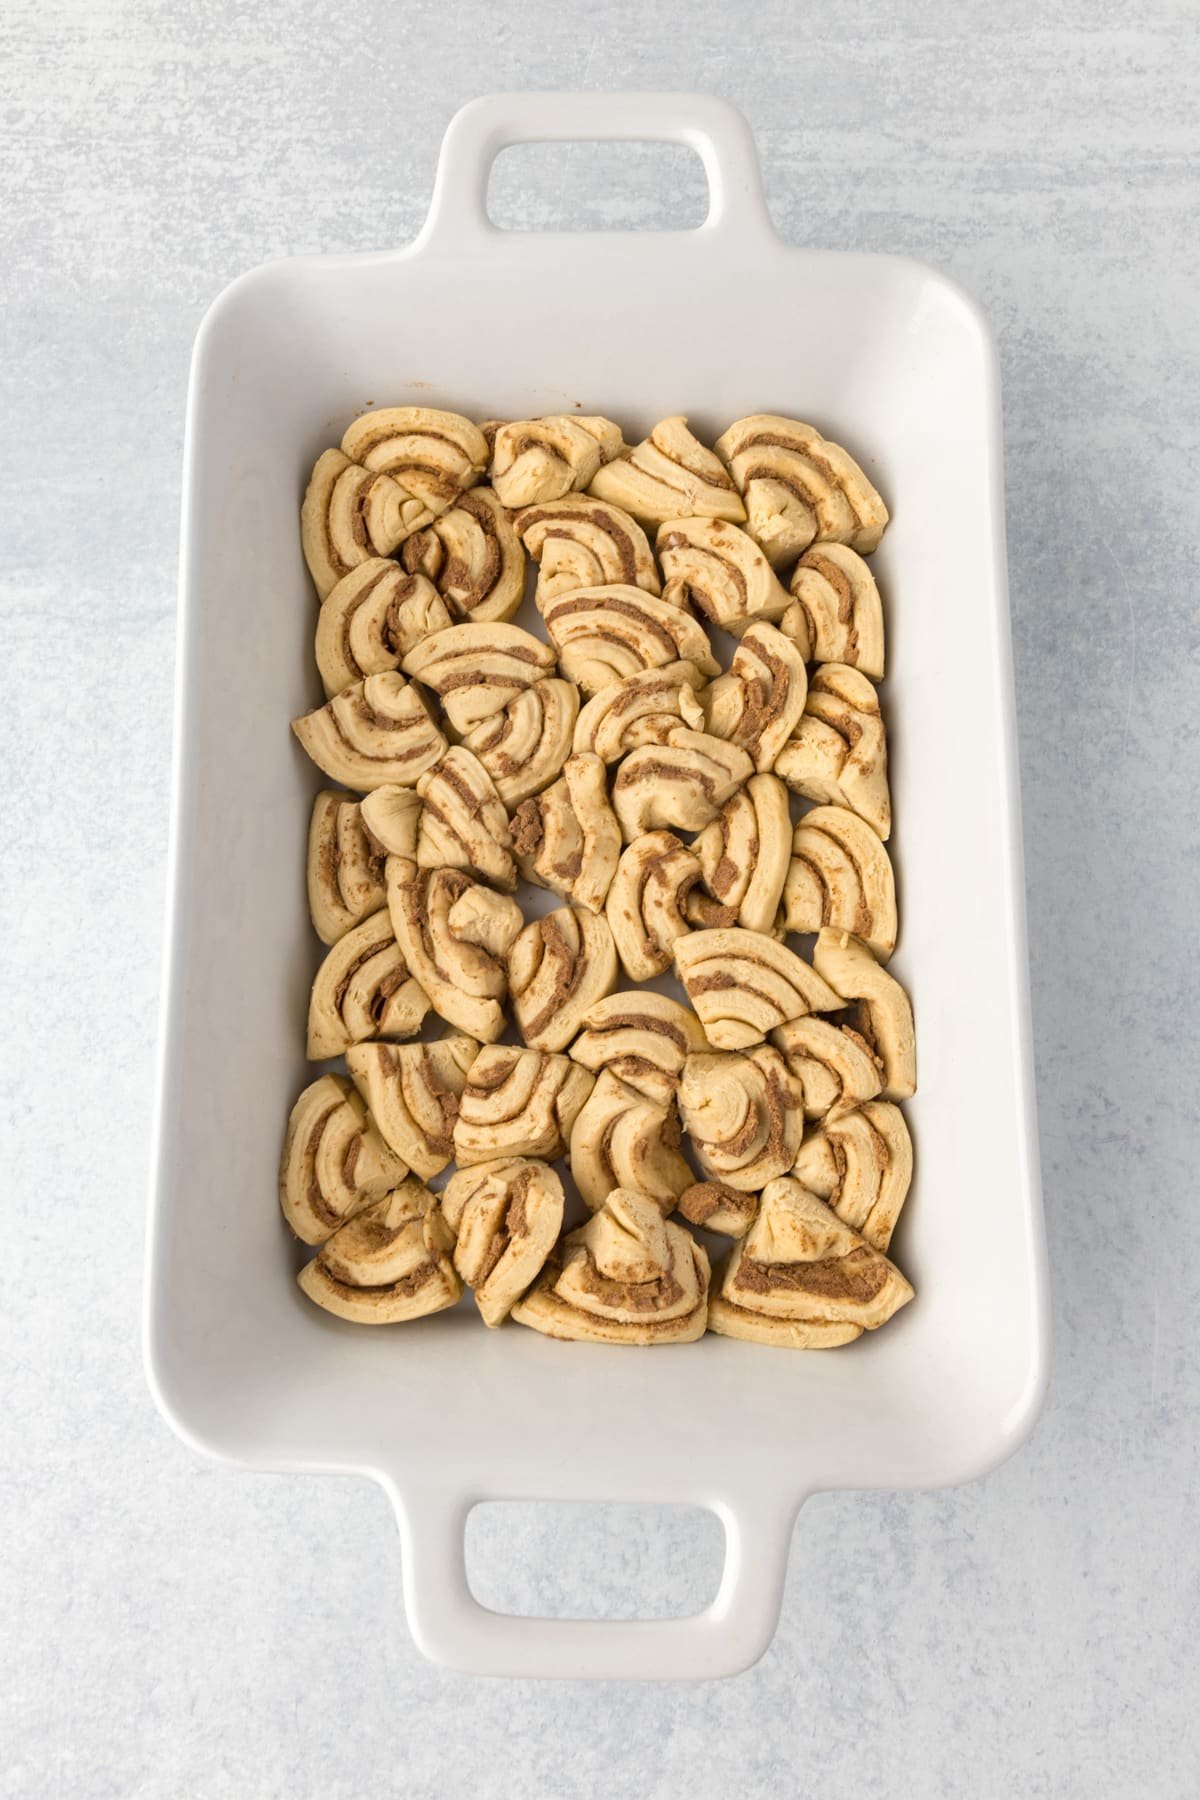 A casserole dish with cinnamon rolls sliced and fit into the dish in an even layer.